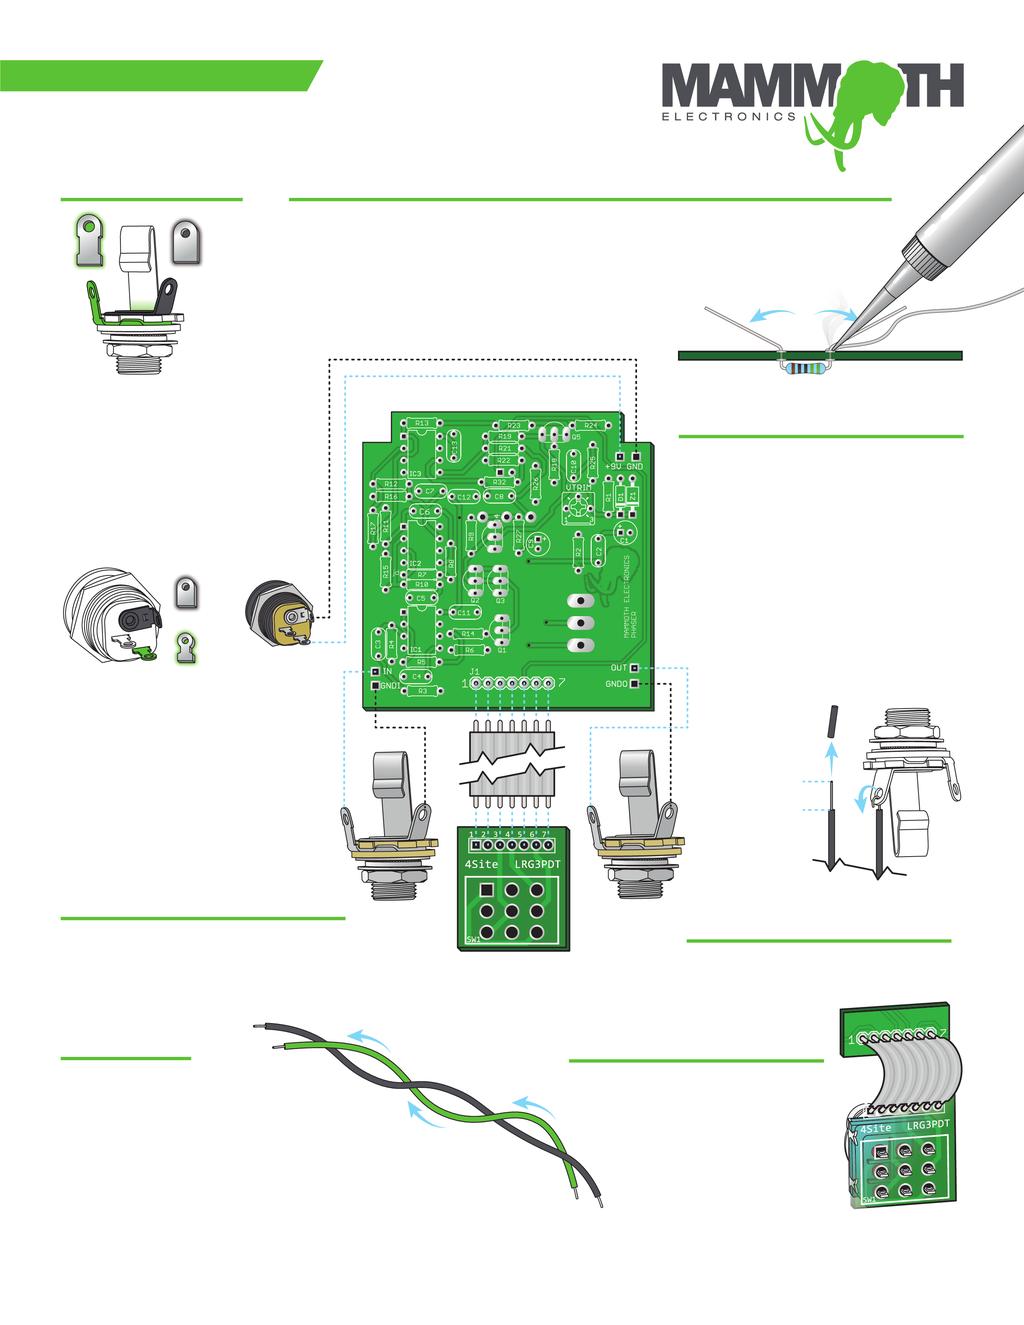 BUILD DIAGRAM Differentiating the Jack Lugs Soldering Components The Components are all board mounted directly to their listed locations.